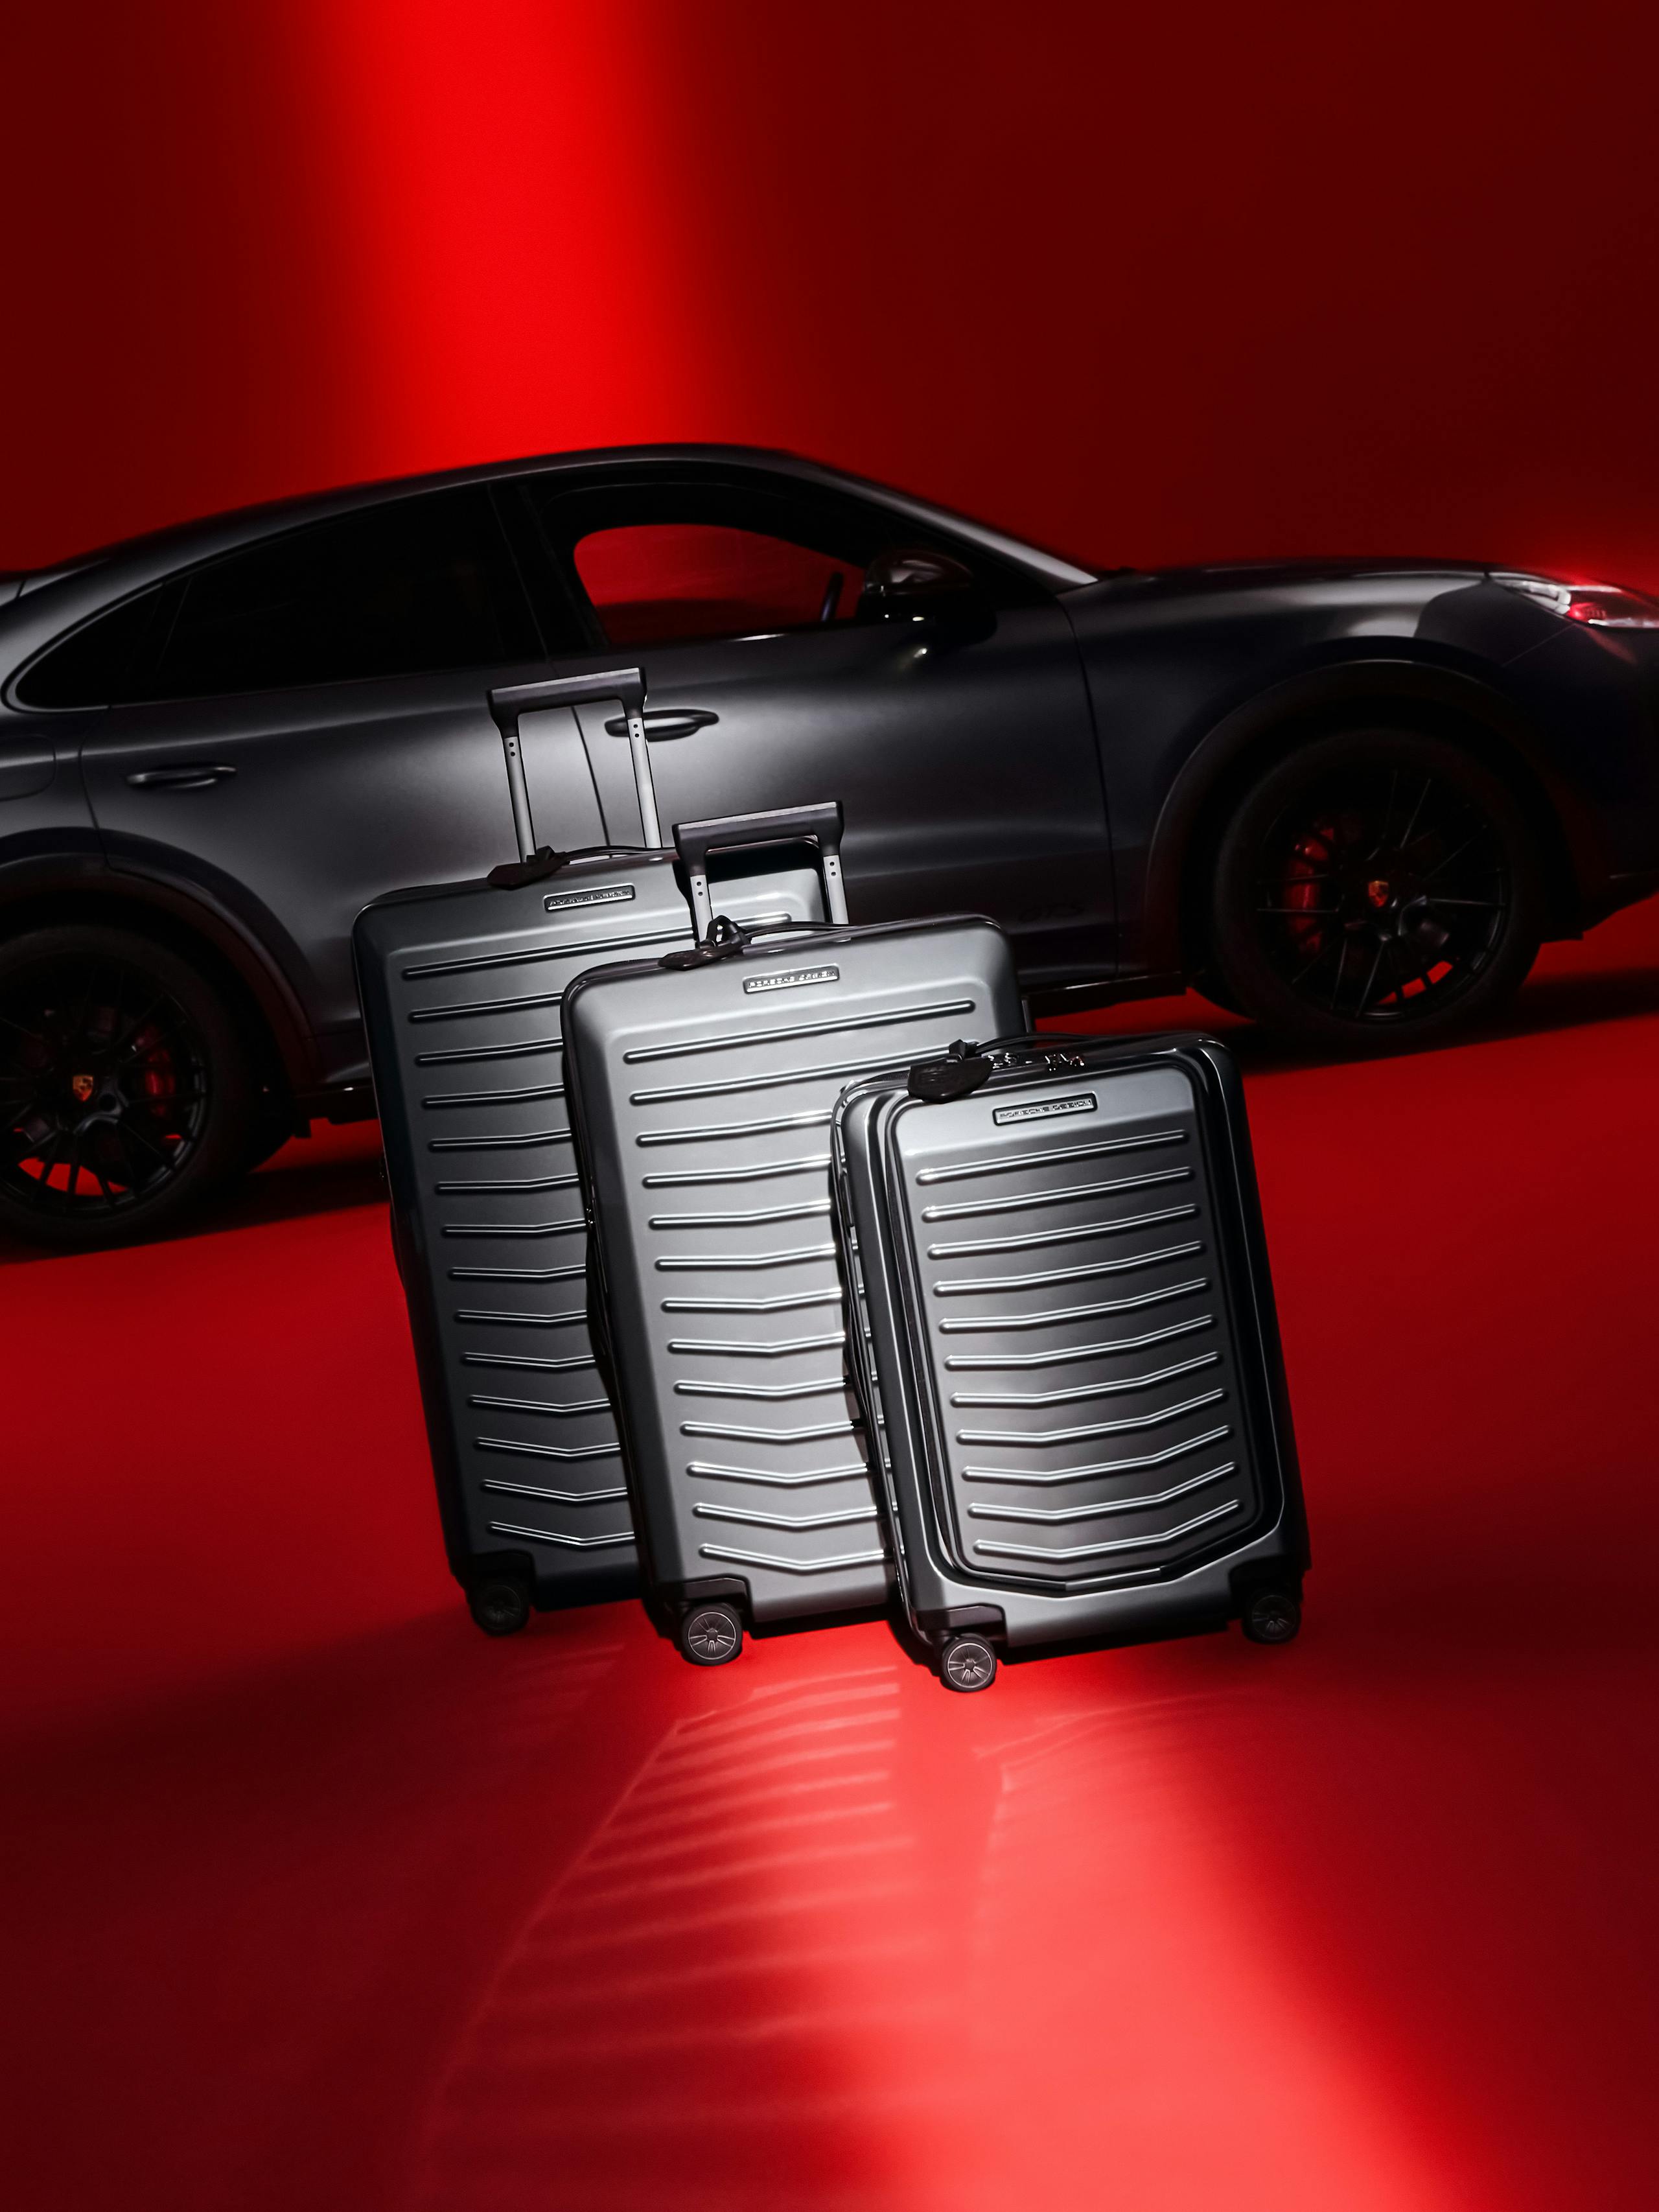 In the picture you can see three suitcases from Porsche Design in three different sizes with a black Porsche Cayenne in the